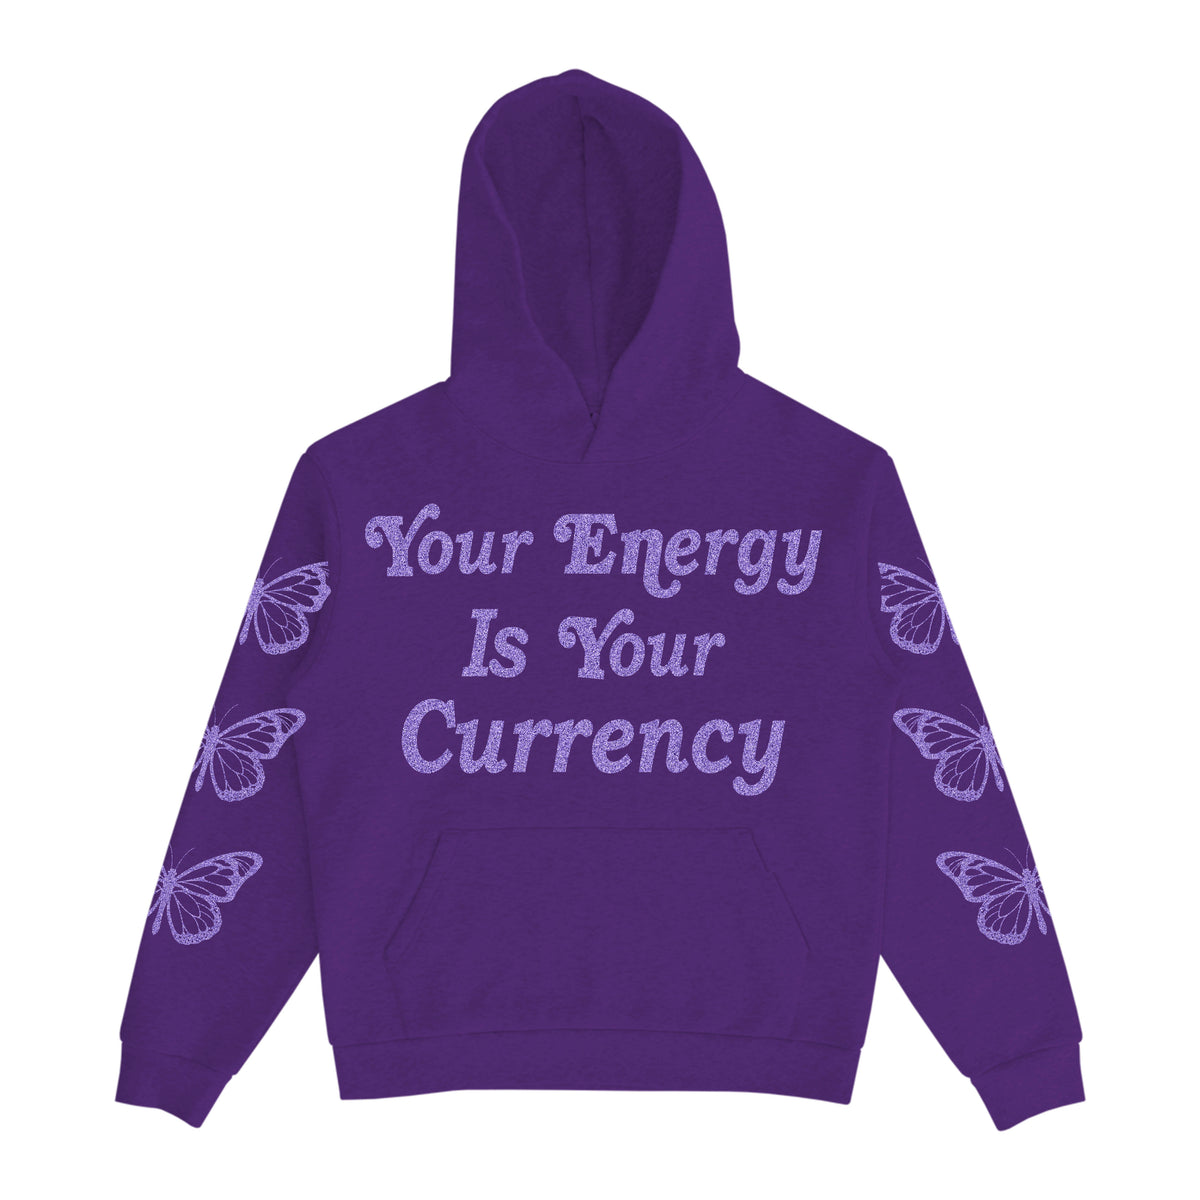 YOUR ENERGY IS YOUR CURRENCY HOODIE - PURPLE